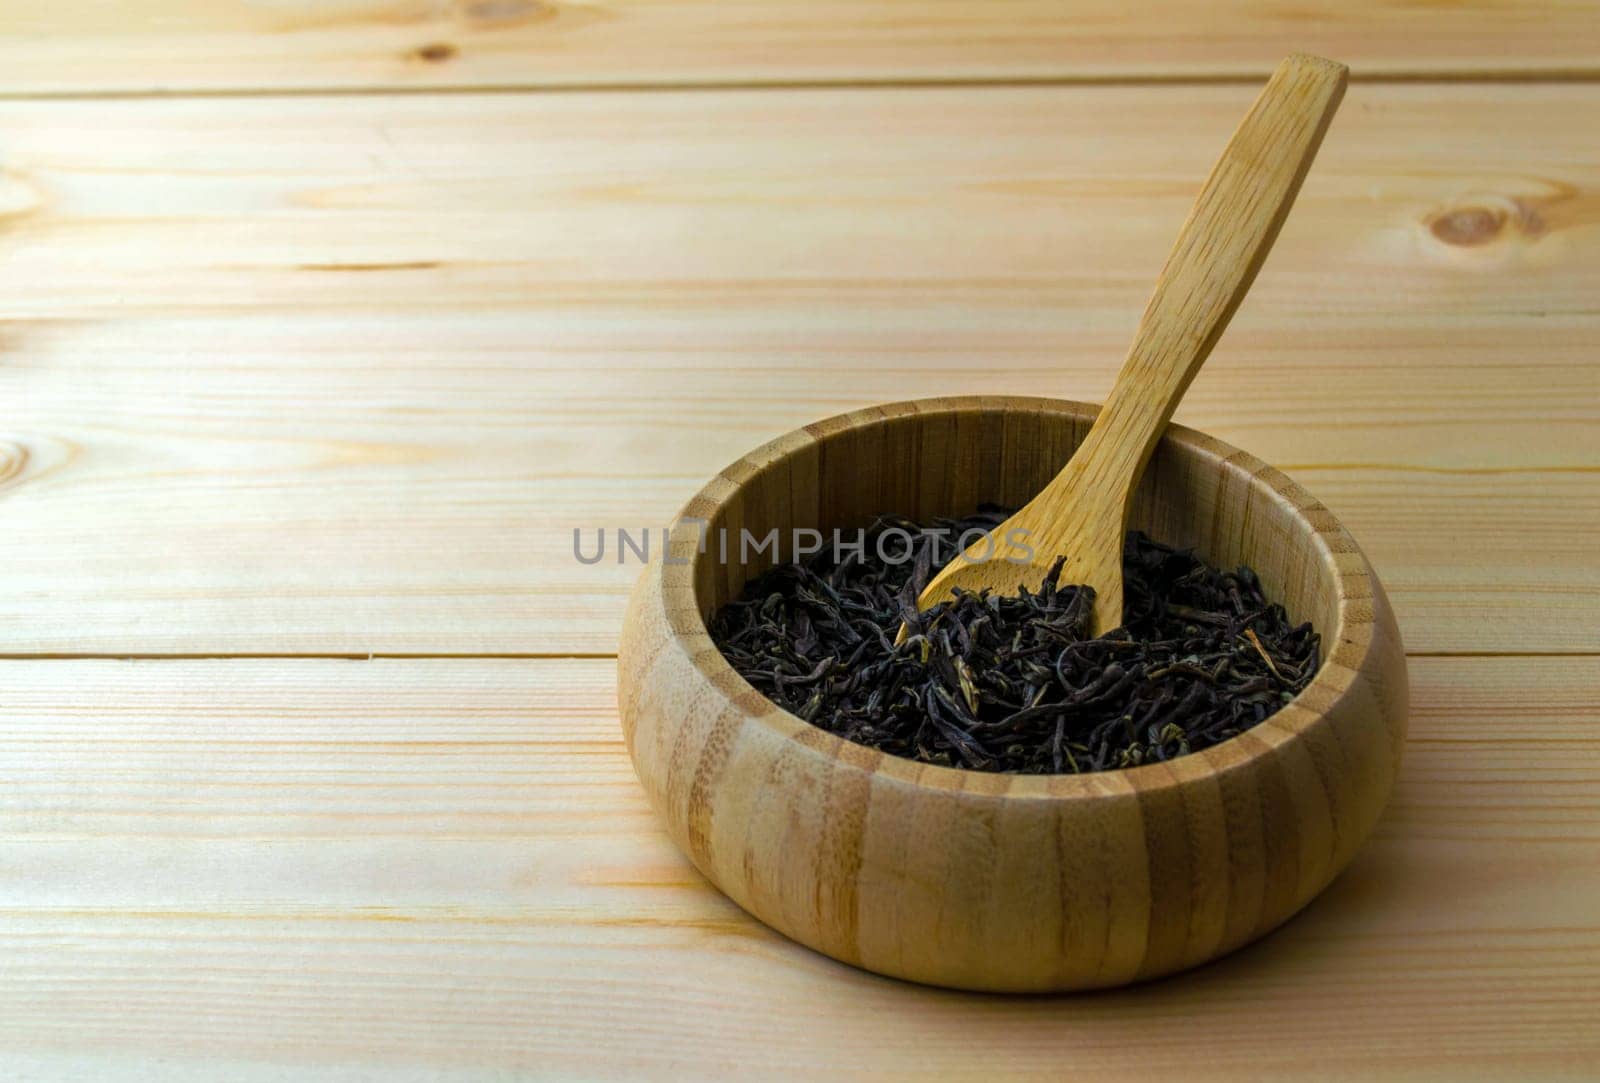 Leaf dry green tea. Leaf dry green tea in a wooden plate on a wooden table.